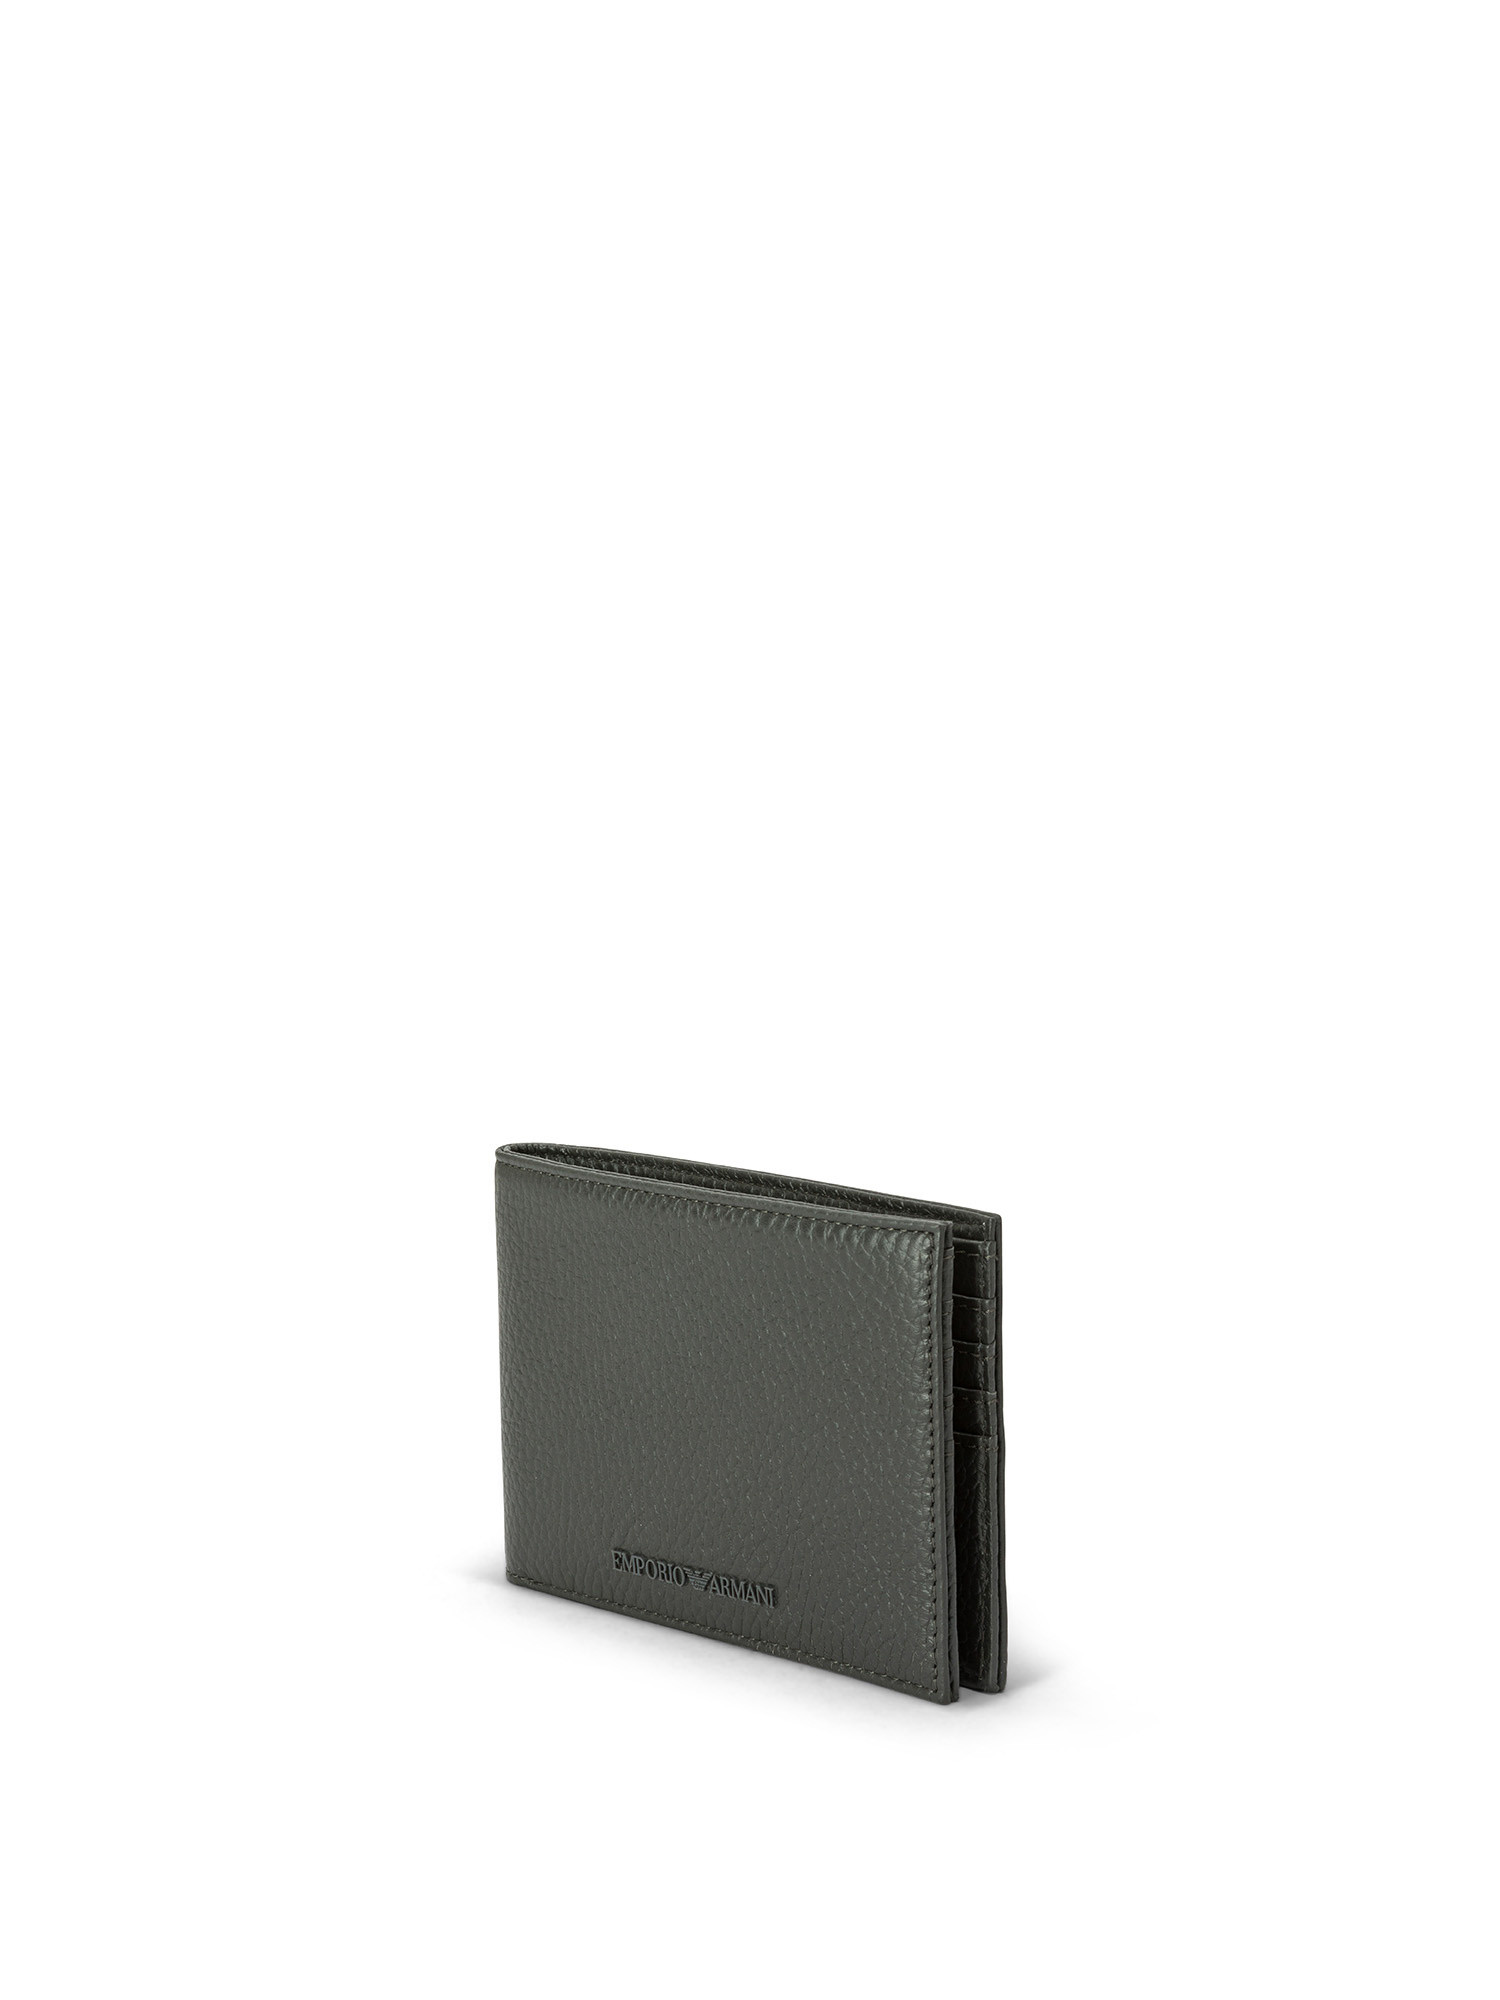 Emporio Armani - Wallet in tumbled leather, Dark Grey, large image number 1